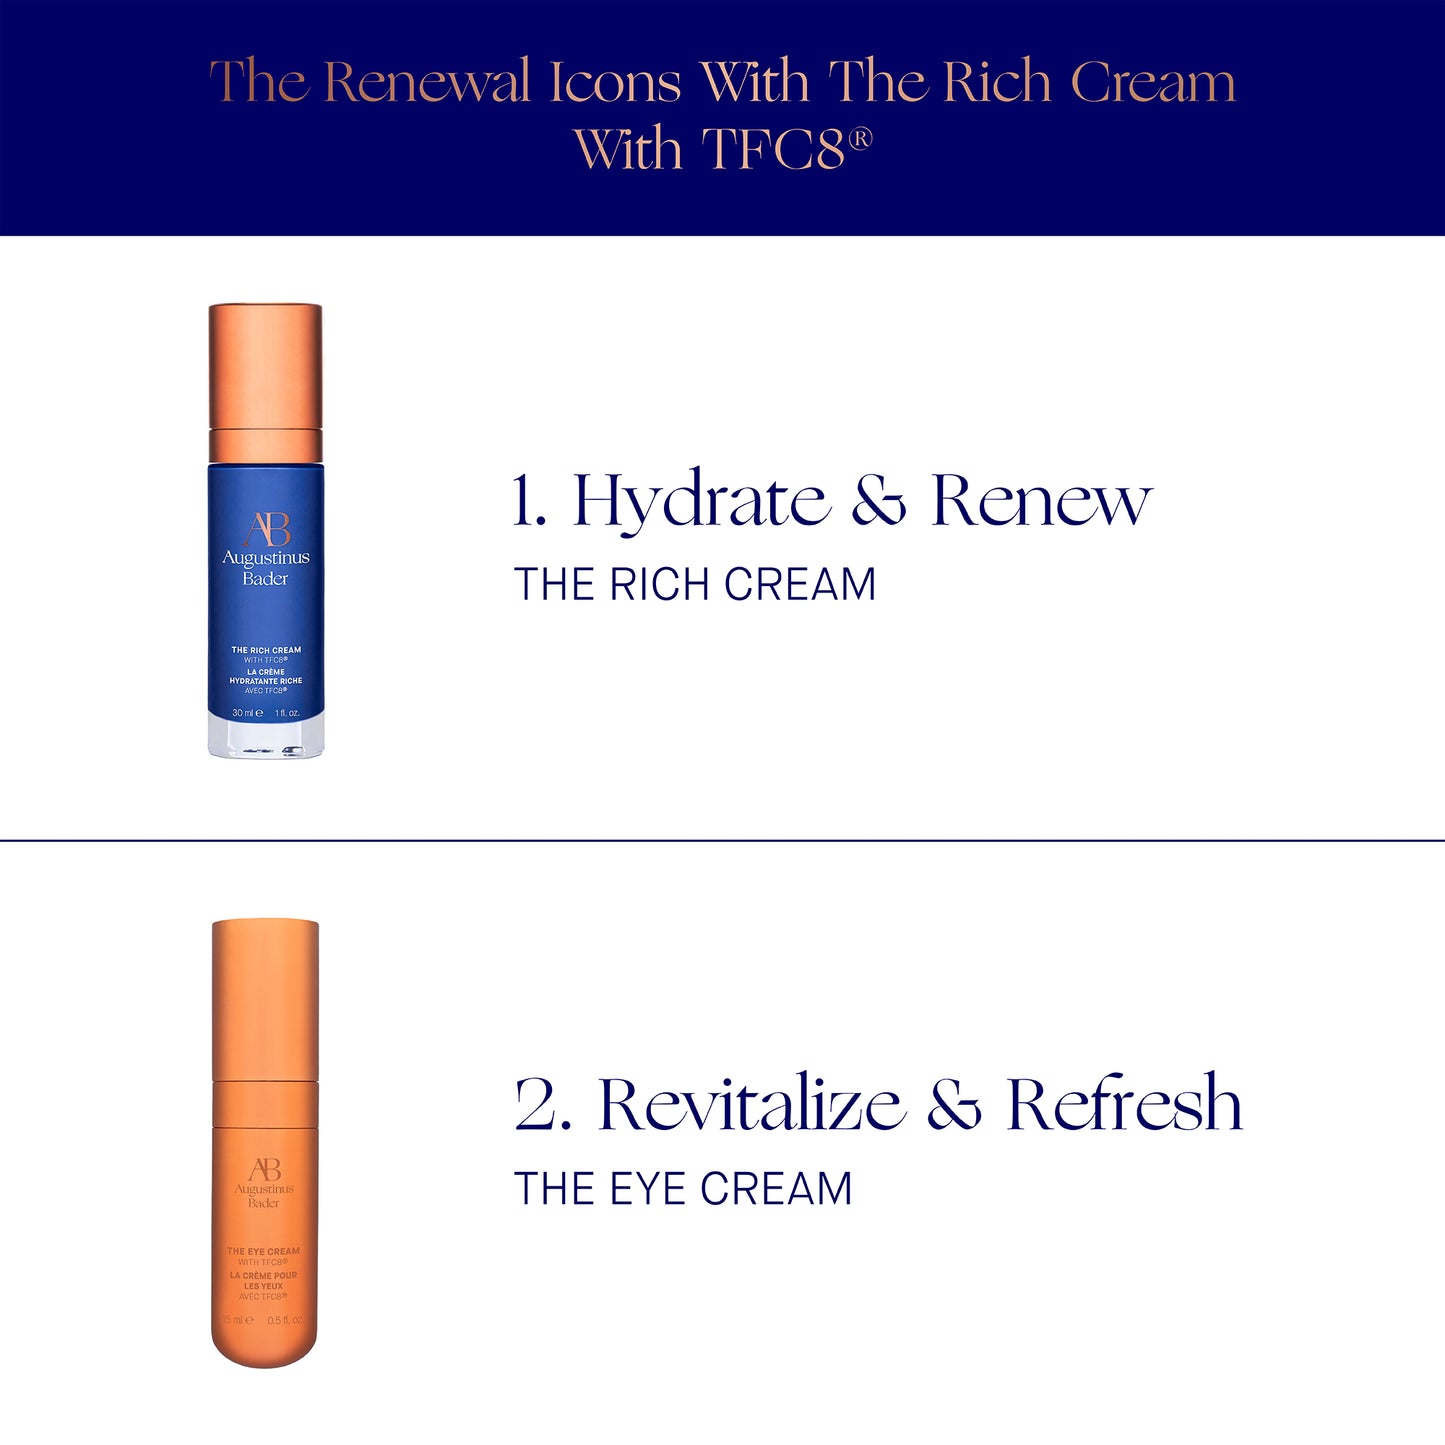 The Renewal Icons with The Rich Cream